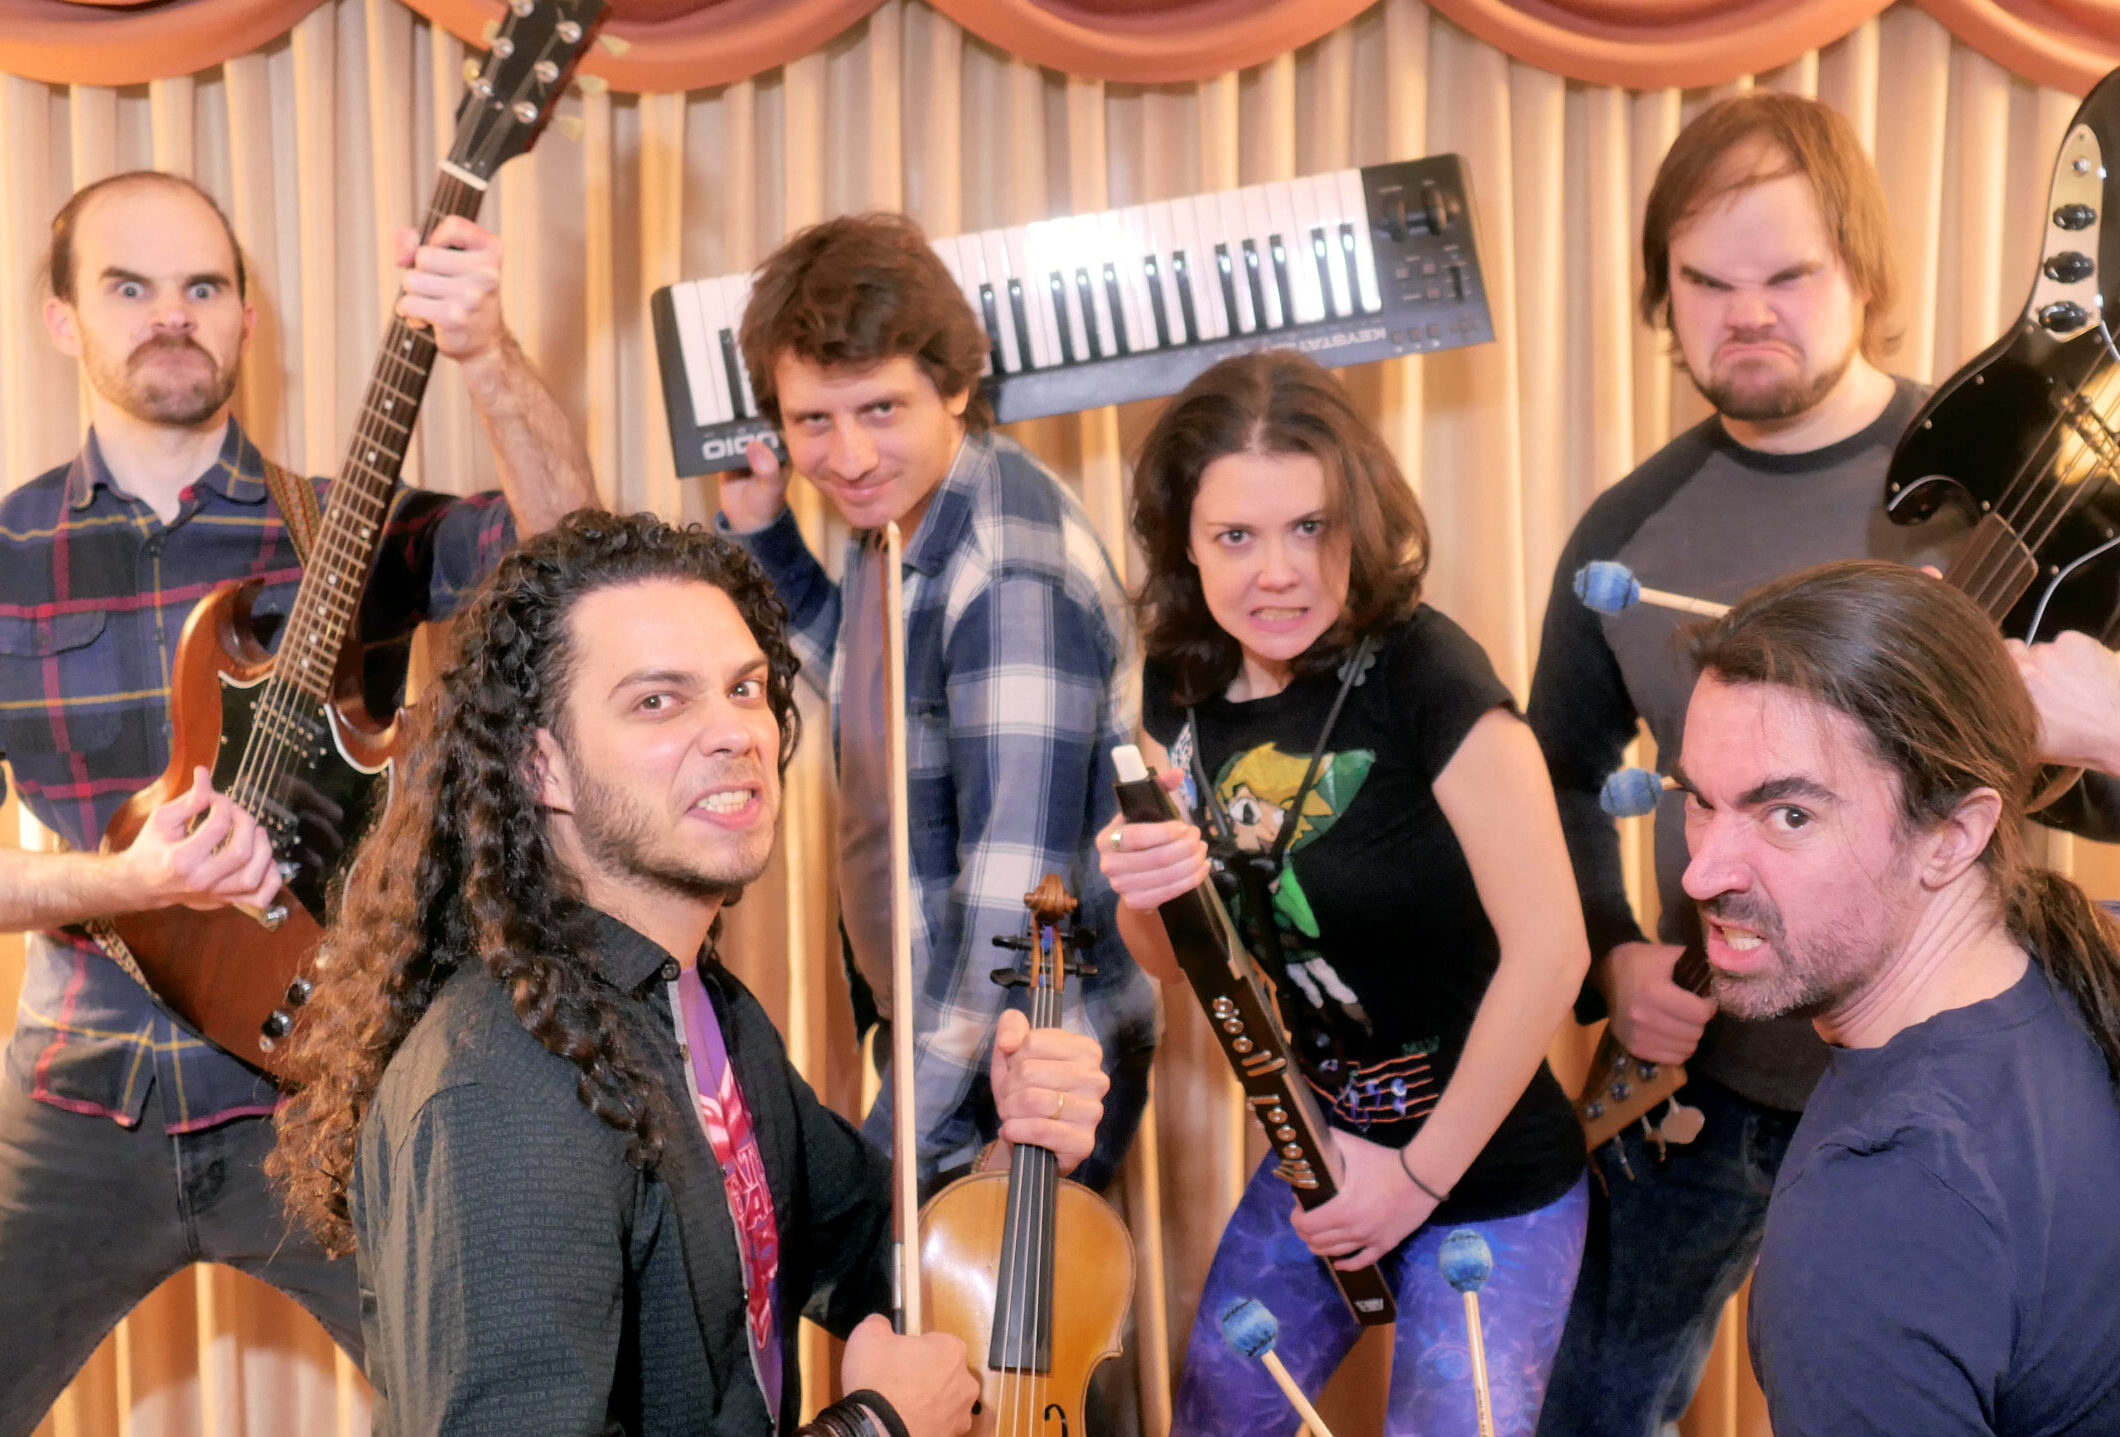 The band DiscoCactus stands in a fighting pose holding their instruments as pretend video game weapons